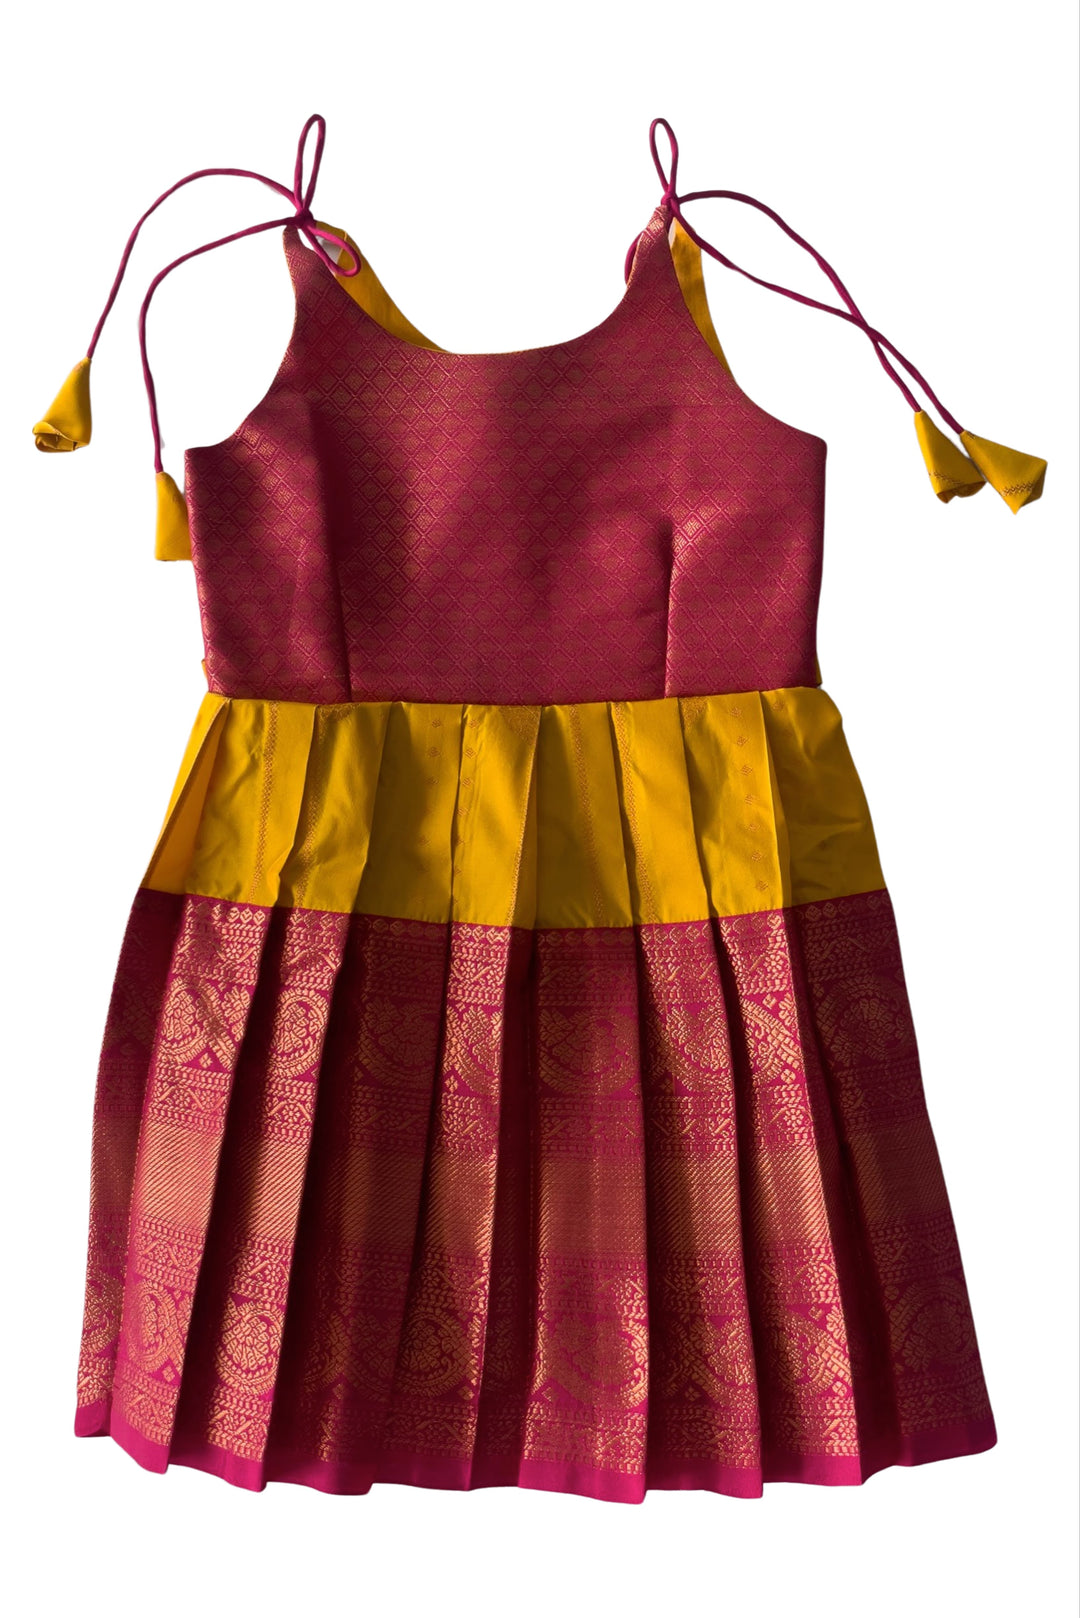 The Nesavu Tie Up Frock Chic Magenta and Mustard Silk Tie-Up Frock – Vibrant Fashion for Festive Occasions Nesavu 18 (2Y) / Yellow / Style 1 T313A-18 Magenta & Mustard Silk Frock | Festive Sleeveless Tie-Up Dress | The Neasvu